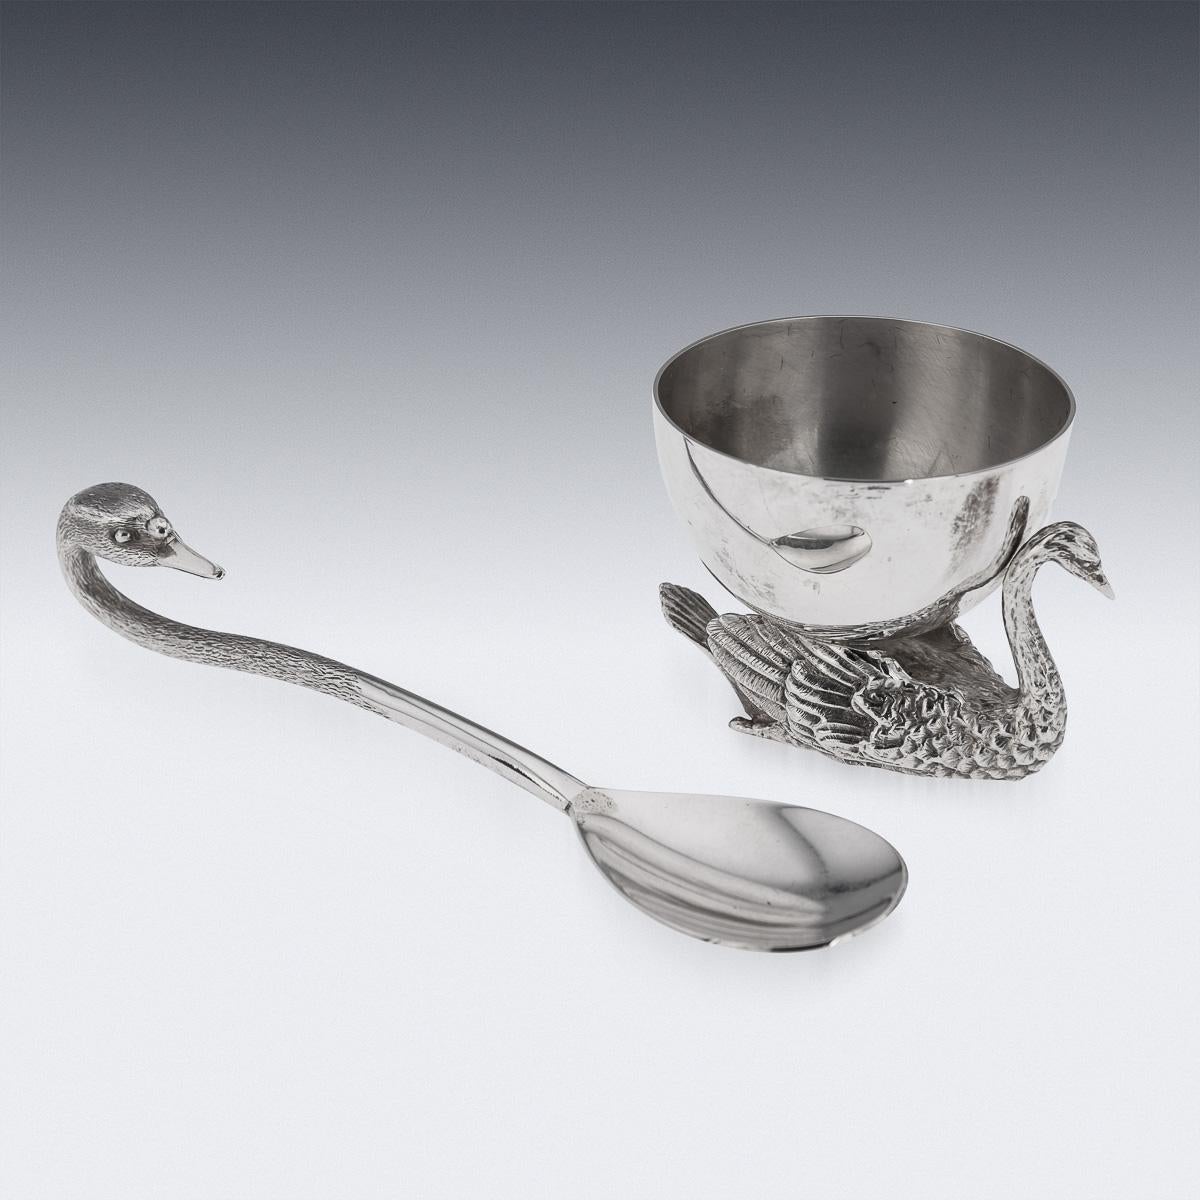 Late 20th Century solid silver novelty swan shaped salt & spoon, beautifully cast and realistically modelled as a swan, the body cast with a detailed textured plumage holding a plain bowl. Hallmarked English silver (925 standard), London, year 1992